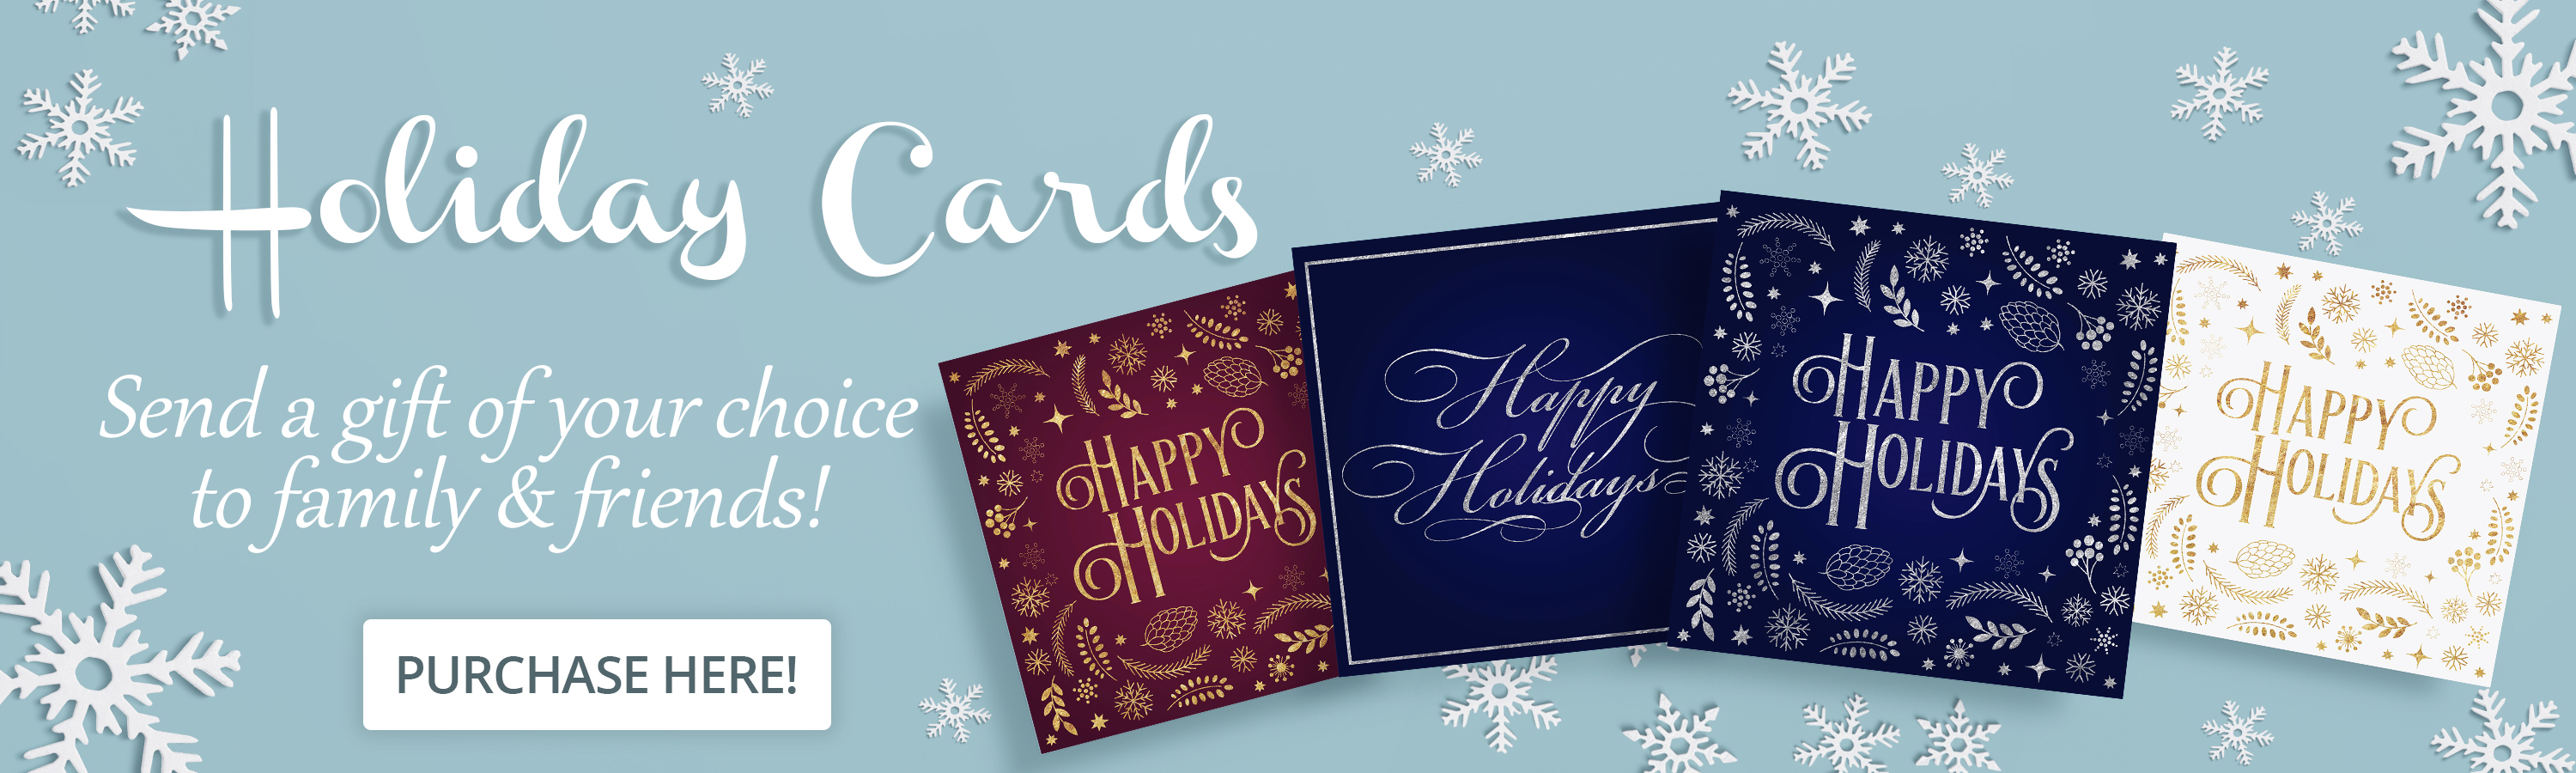 Holiday Cards 2015 banner 4